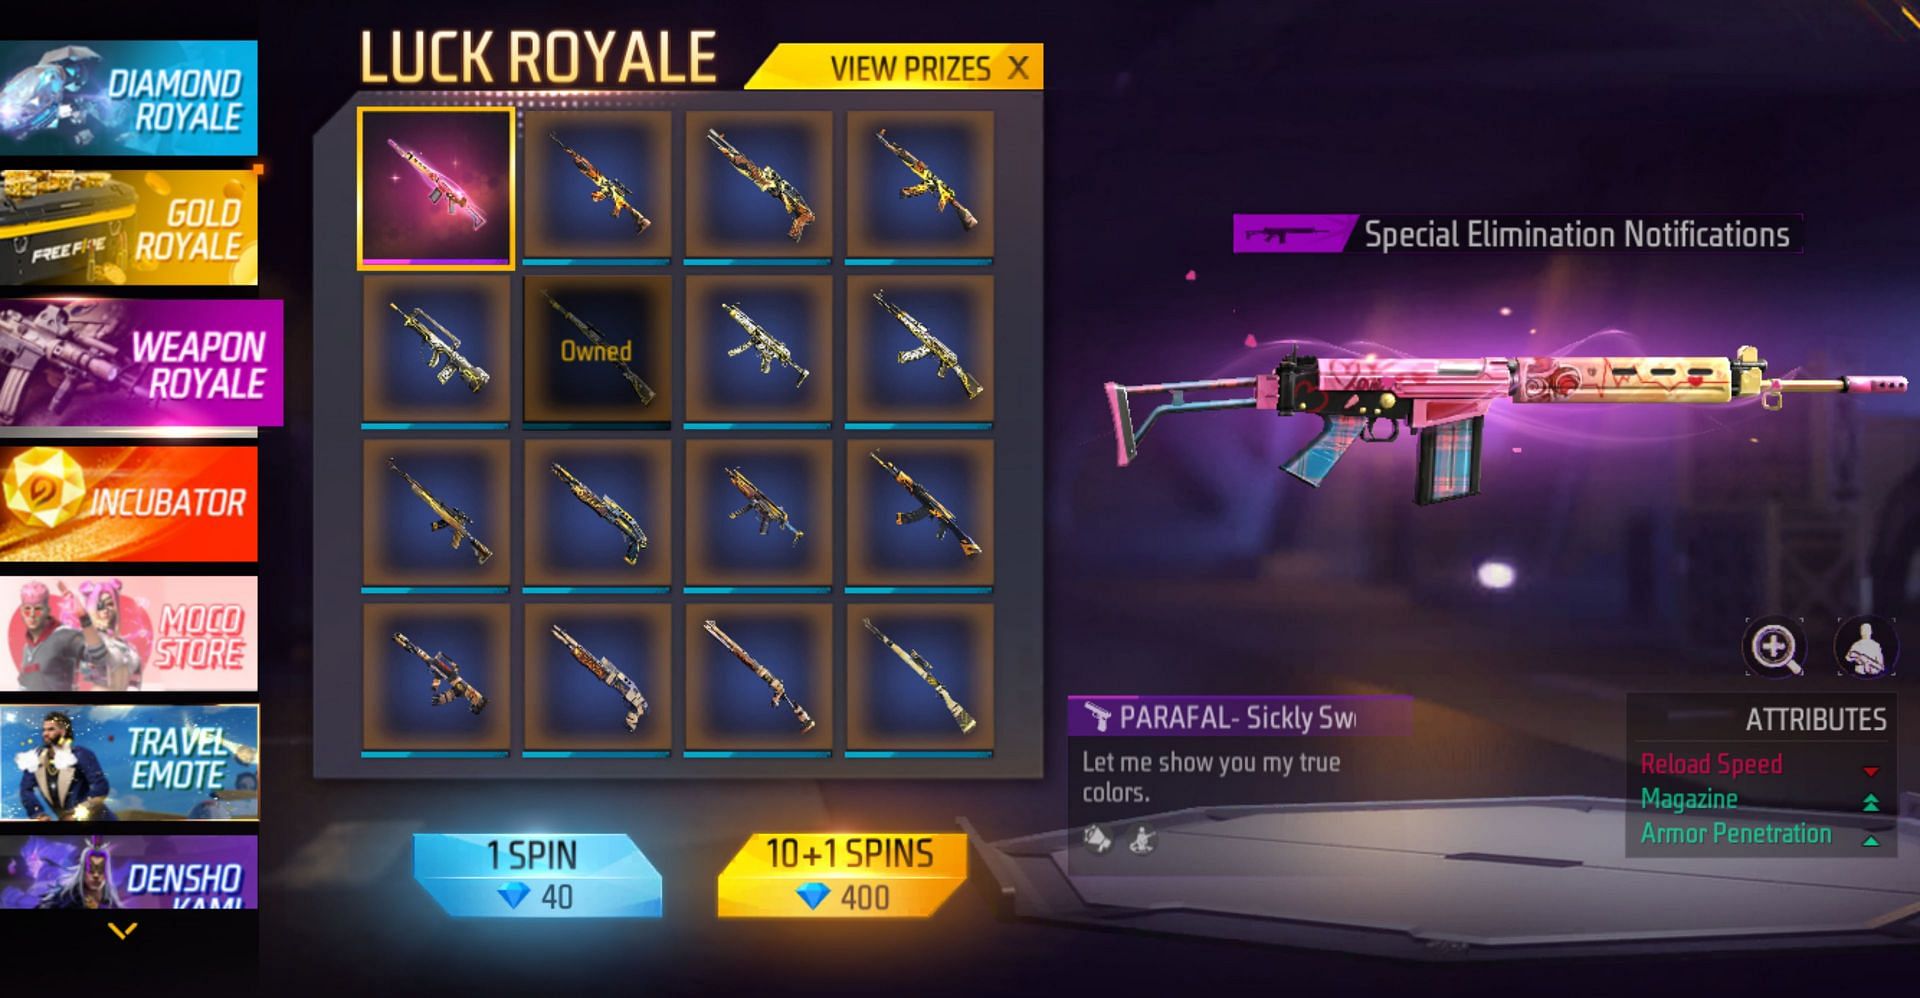 The prize pool of the current Luck Royale (Image via Garena)